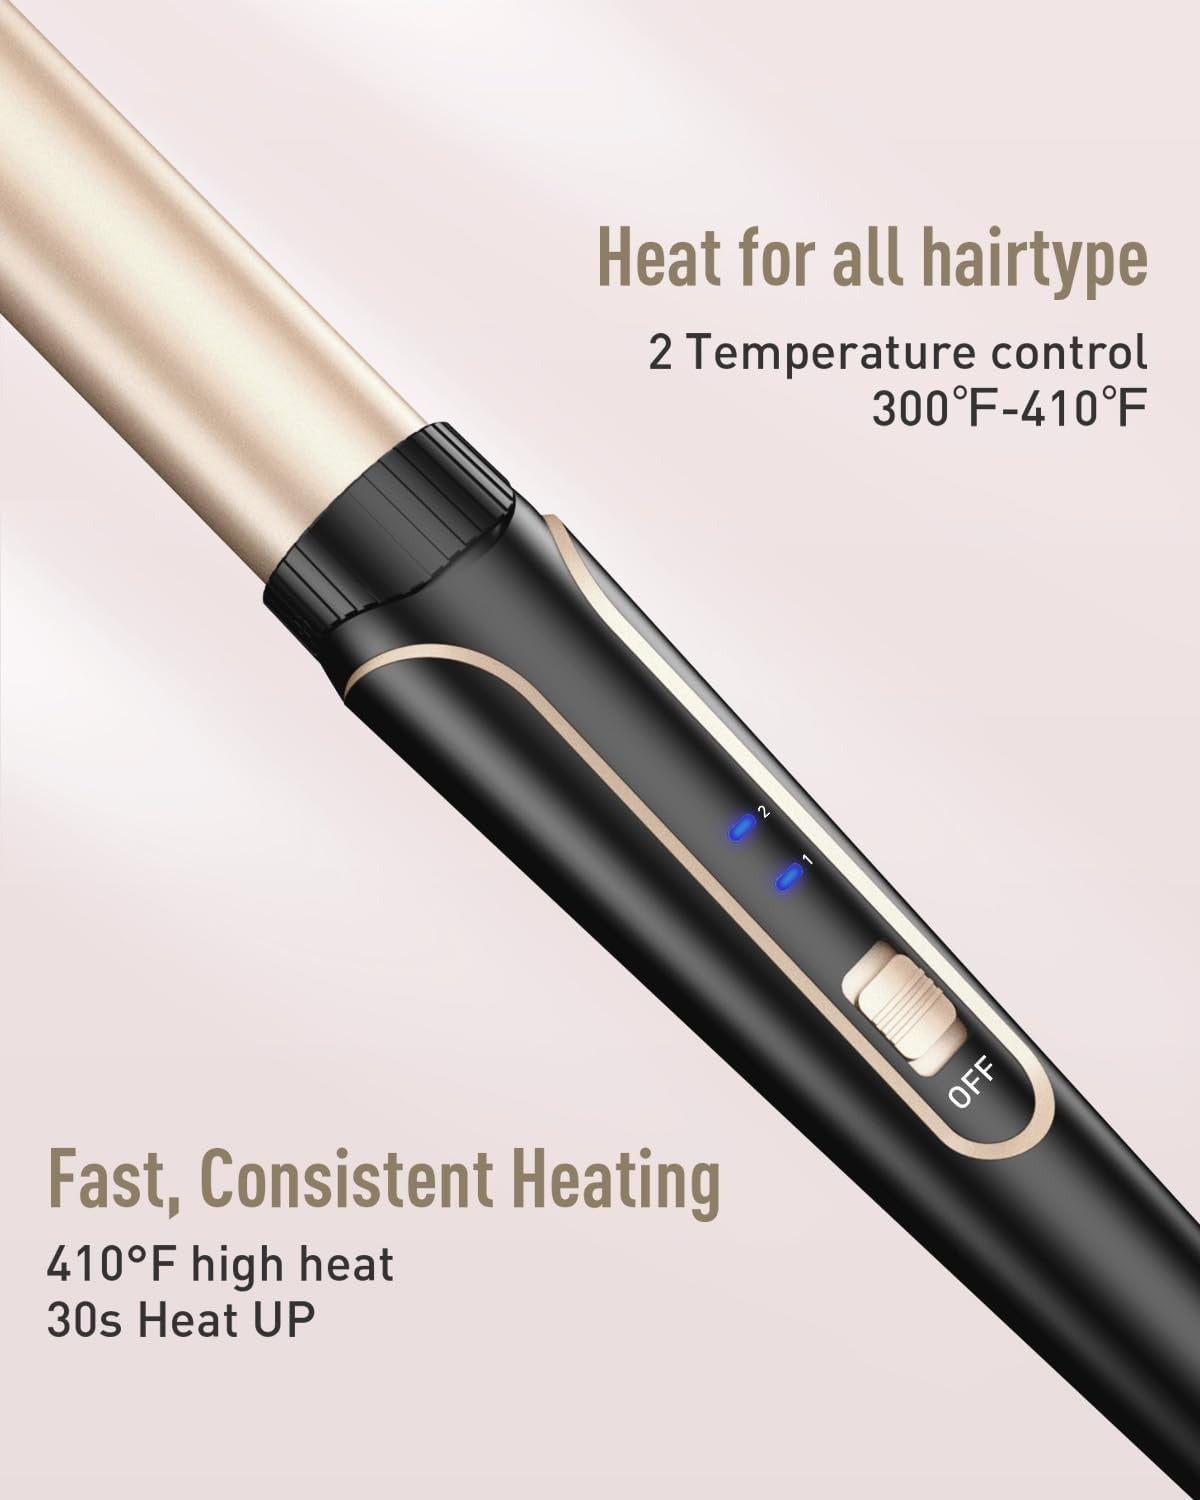 5 in 1 hair curler set with 3 barrel hair curler for women, fast heating hair curler for all hair types